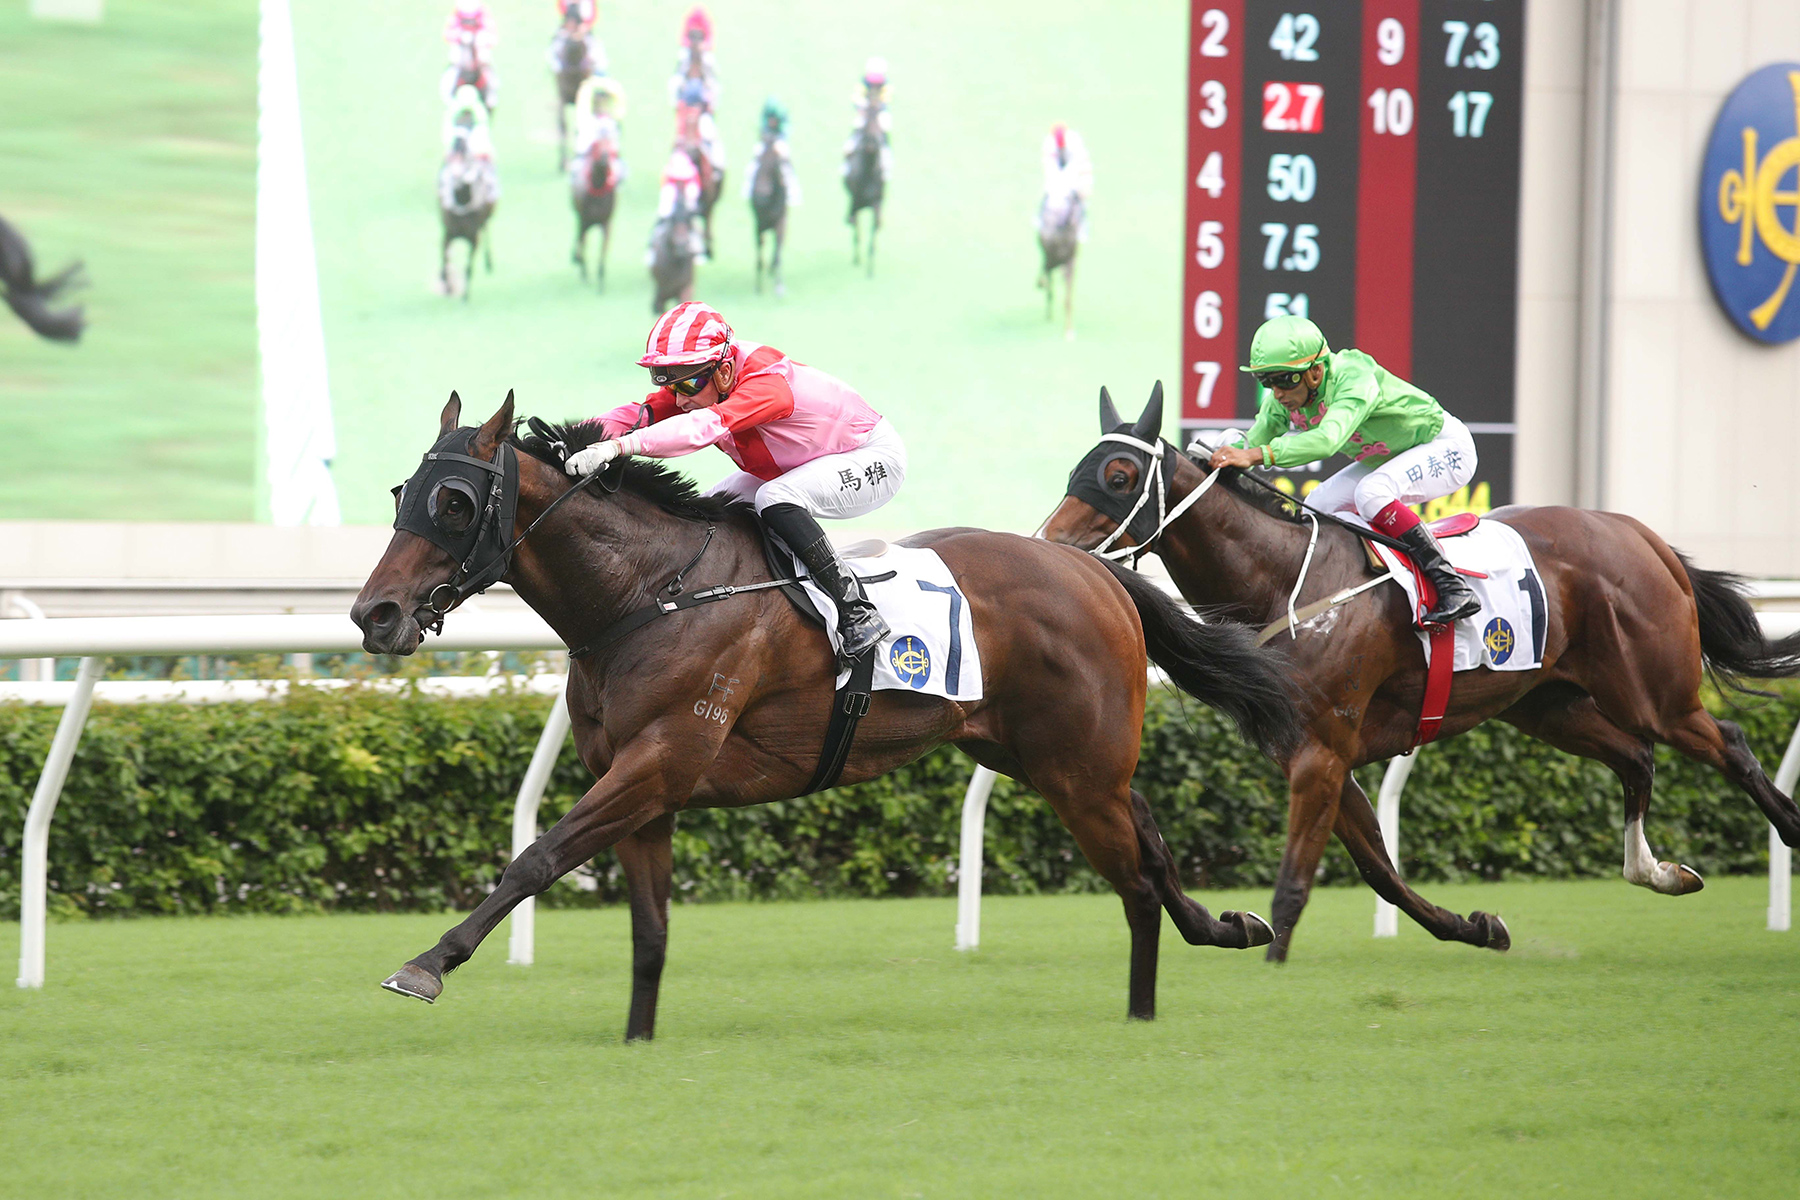 The Douglas Whyte-trained Ace One takes the Class 3 Apprentice Jockeys’ School 50th Anniversary Cup Handicap (1200m) under Ruan Maia at Sha Tin Racecourse today (Sunday, 5 June).